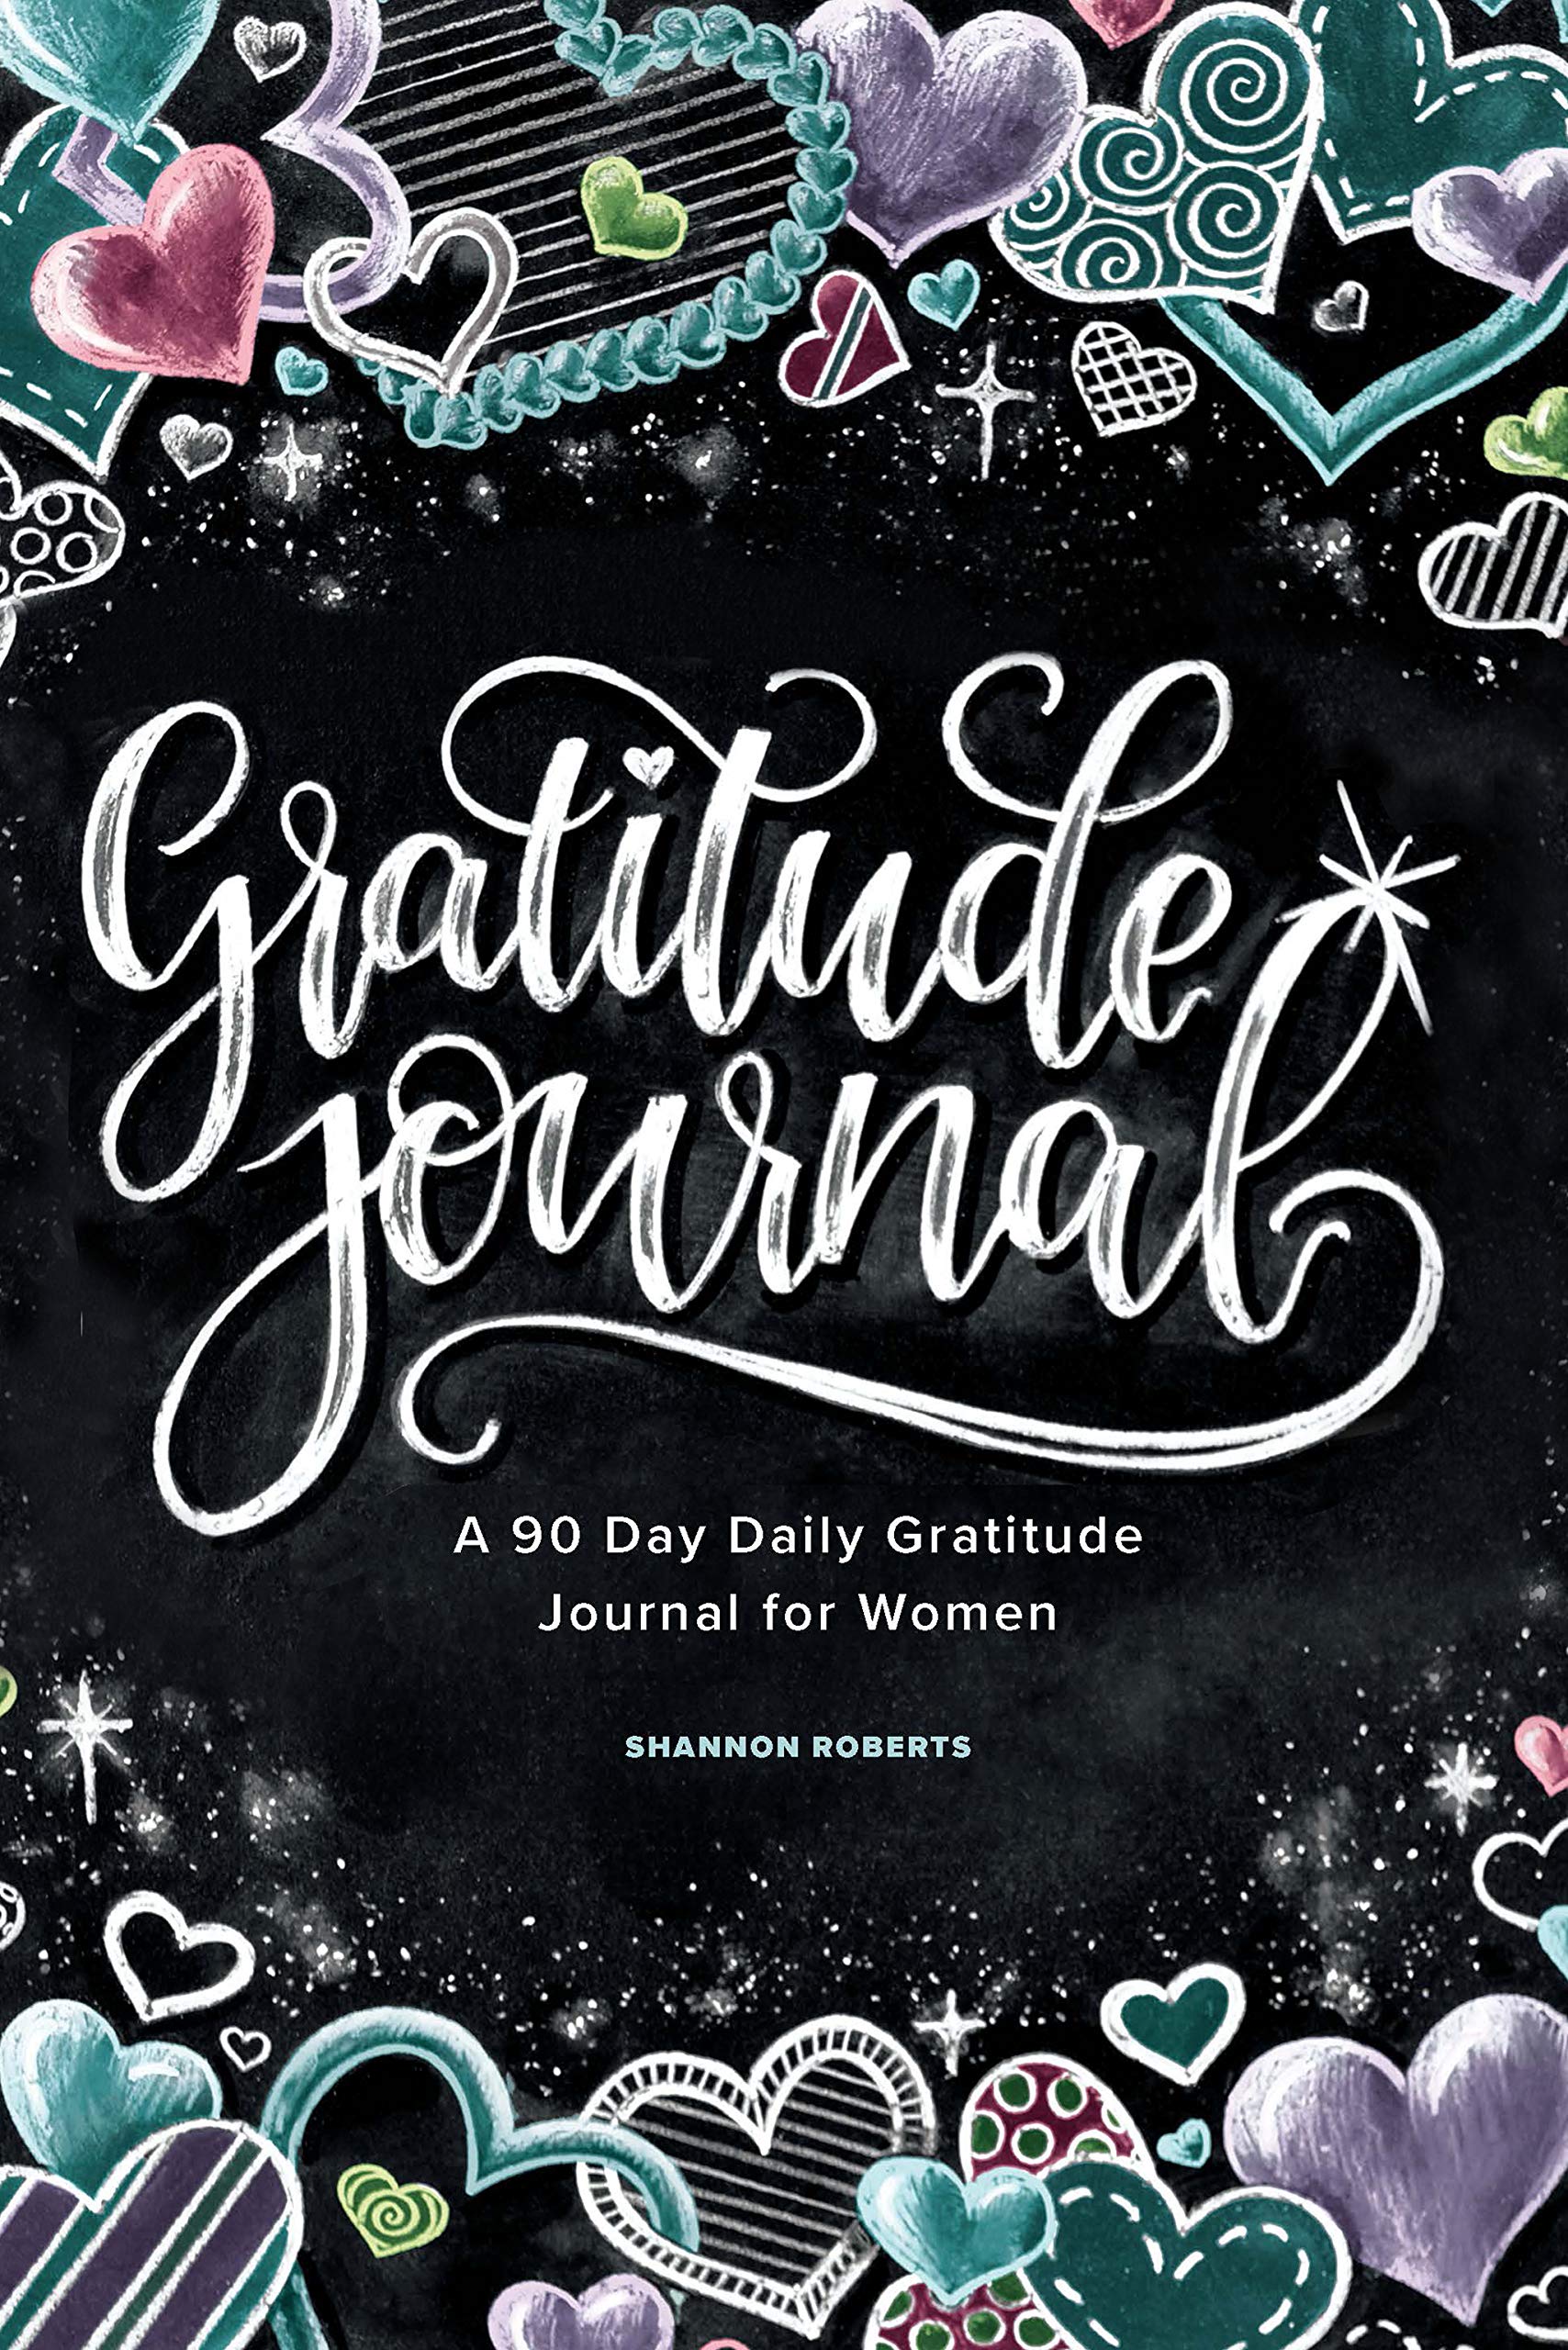 9 Guided Journals That'll Help You Flourish This Year